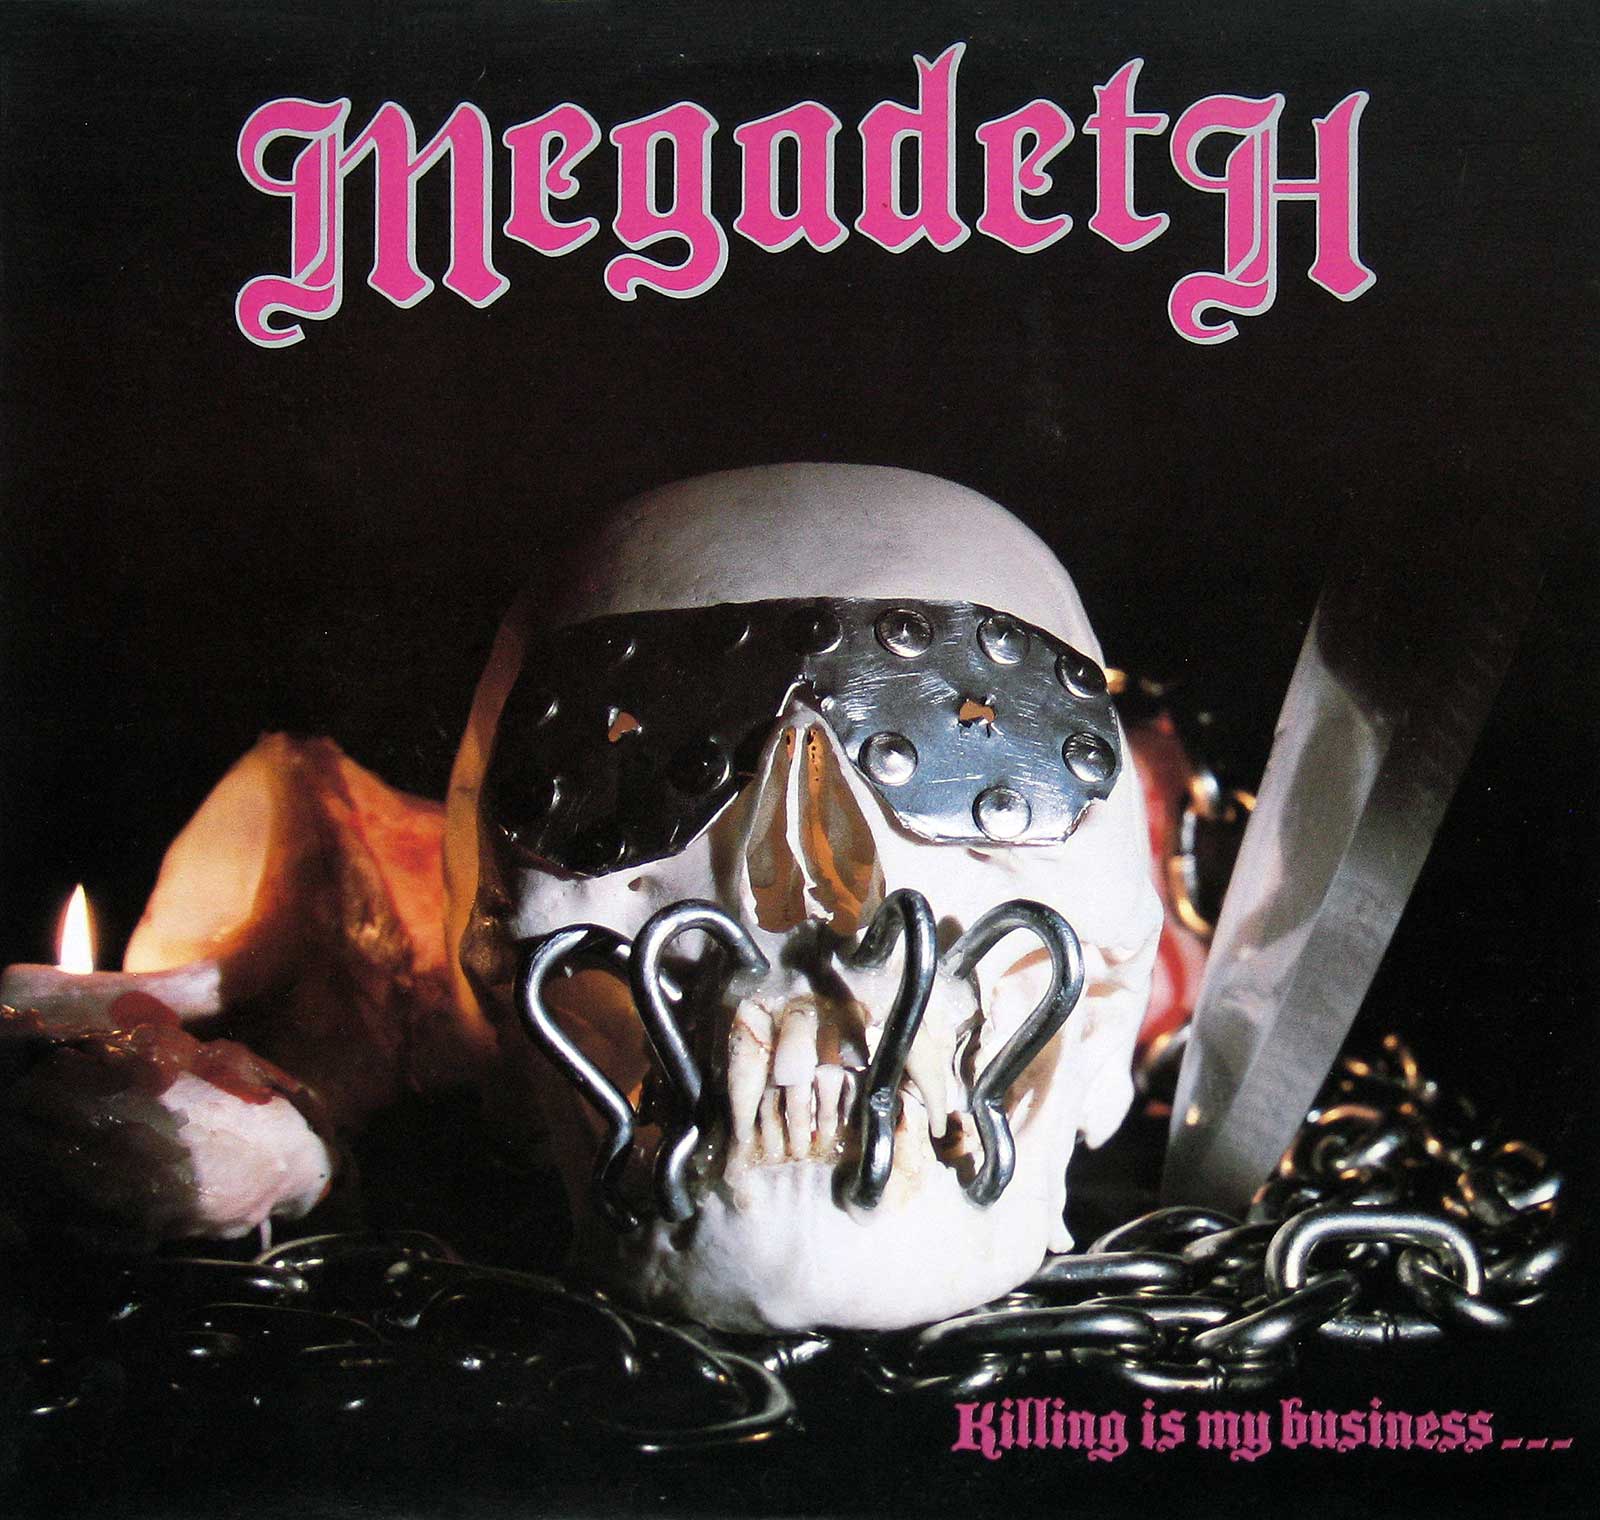 High Resolution Photo Megadeth - Killing is my Business ... ... and Business is Good Vinyl Record